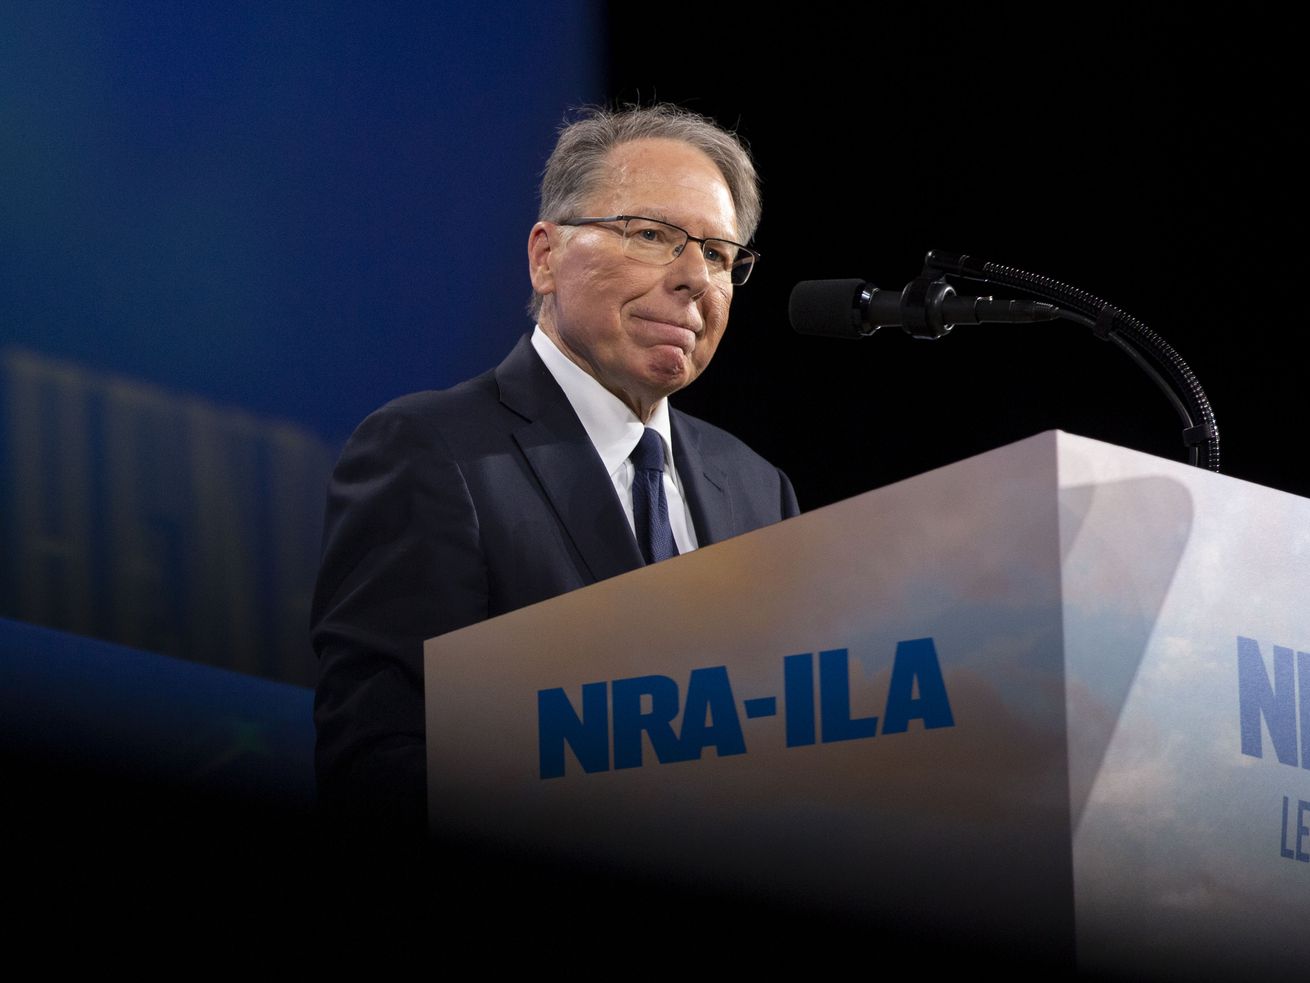 The lawsuit seeking to impose the “death penalty” on the NRA, explained